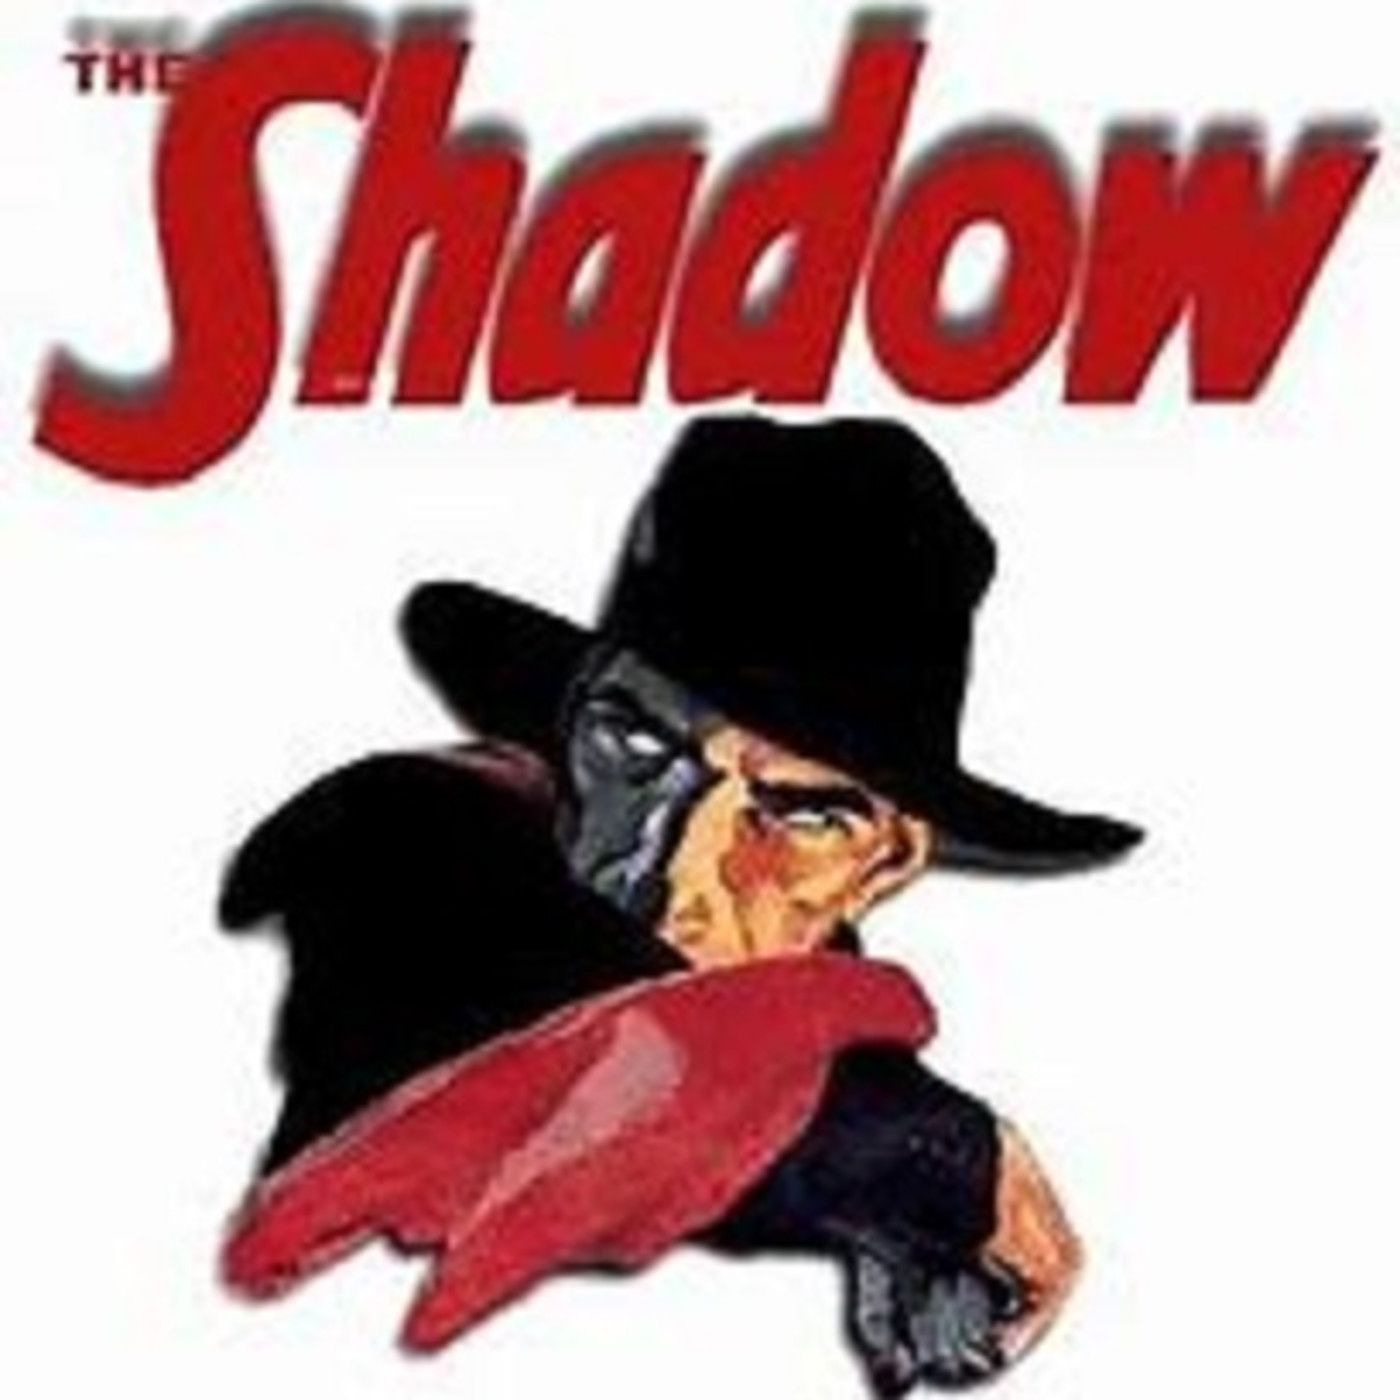 1946-1208 - The Devil Takes A Wife - 00 - The Shadow